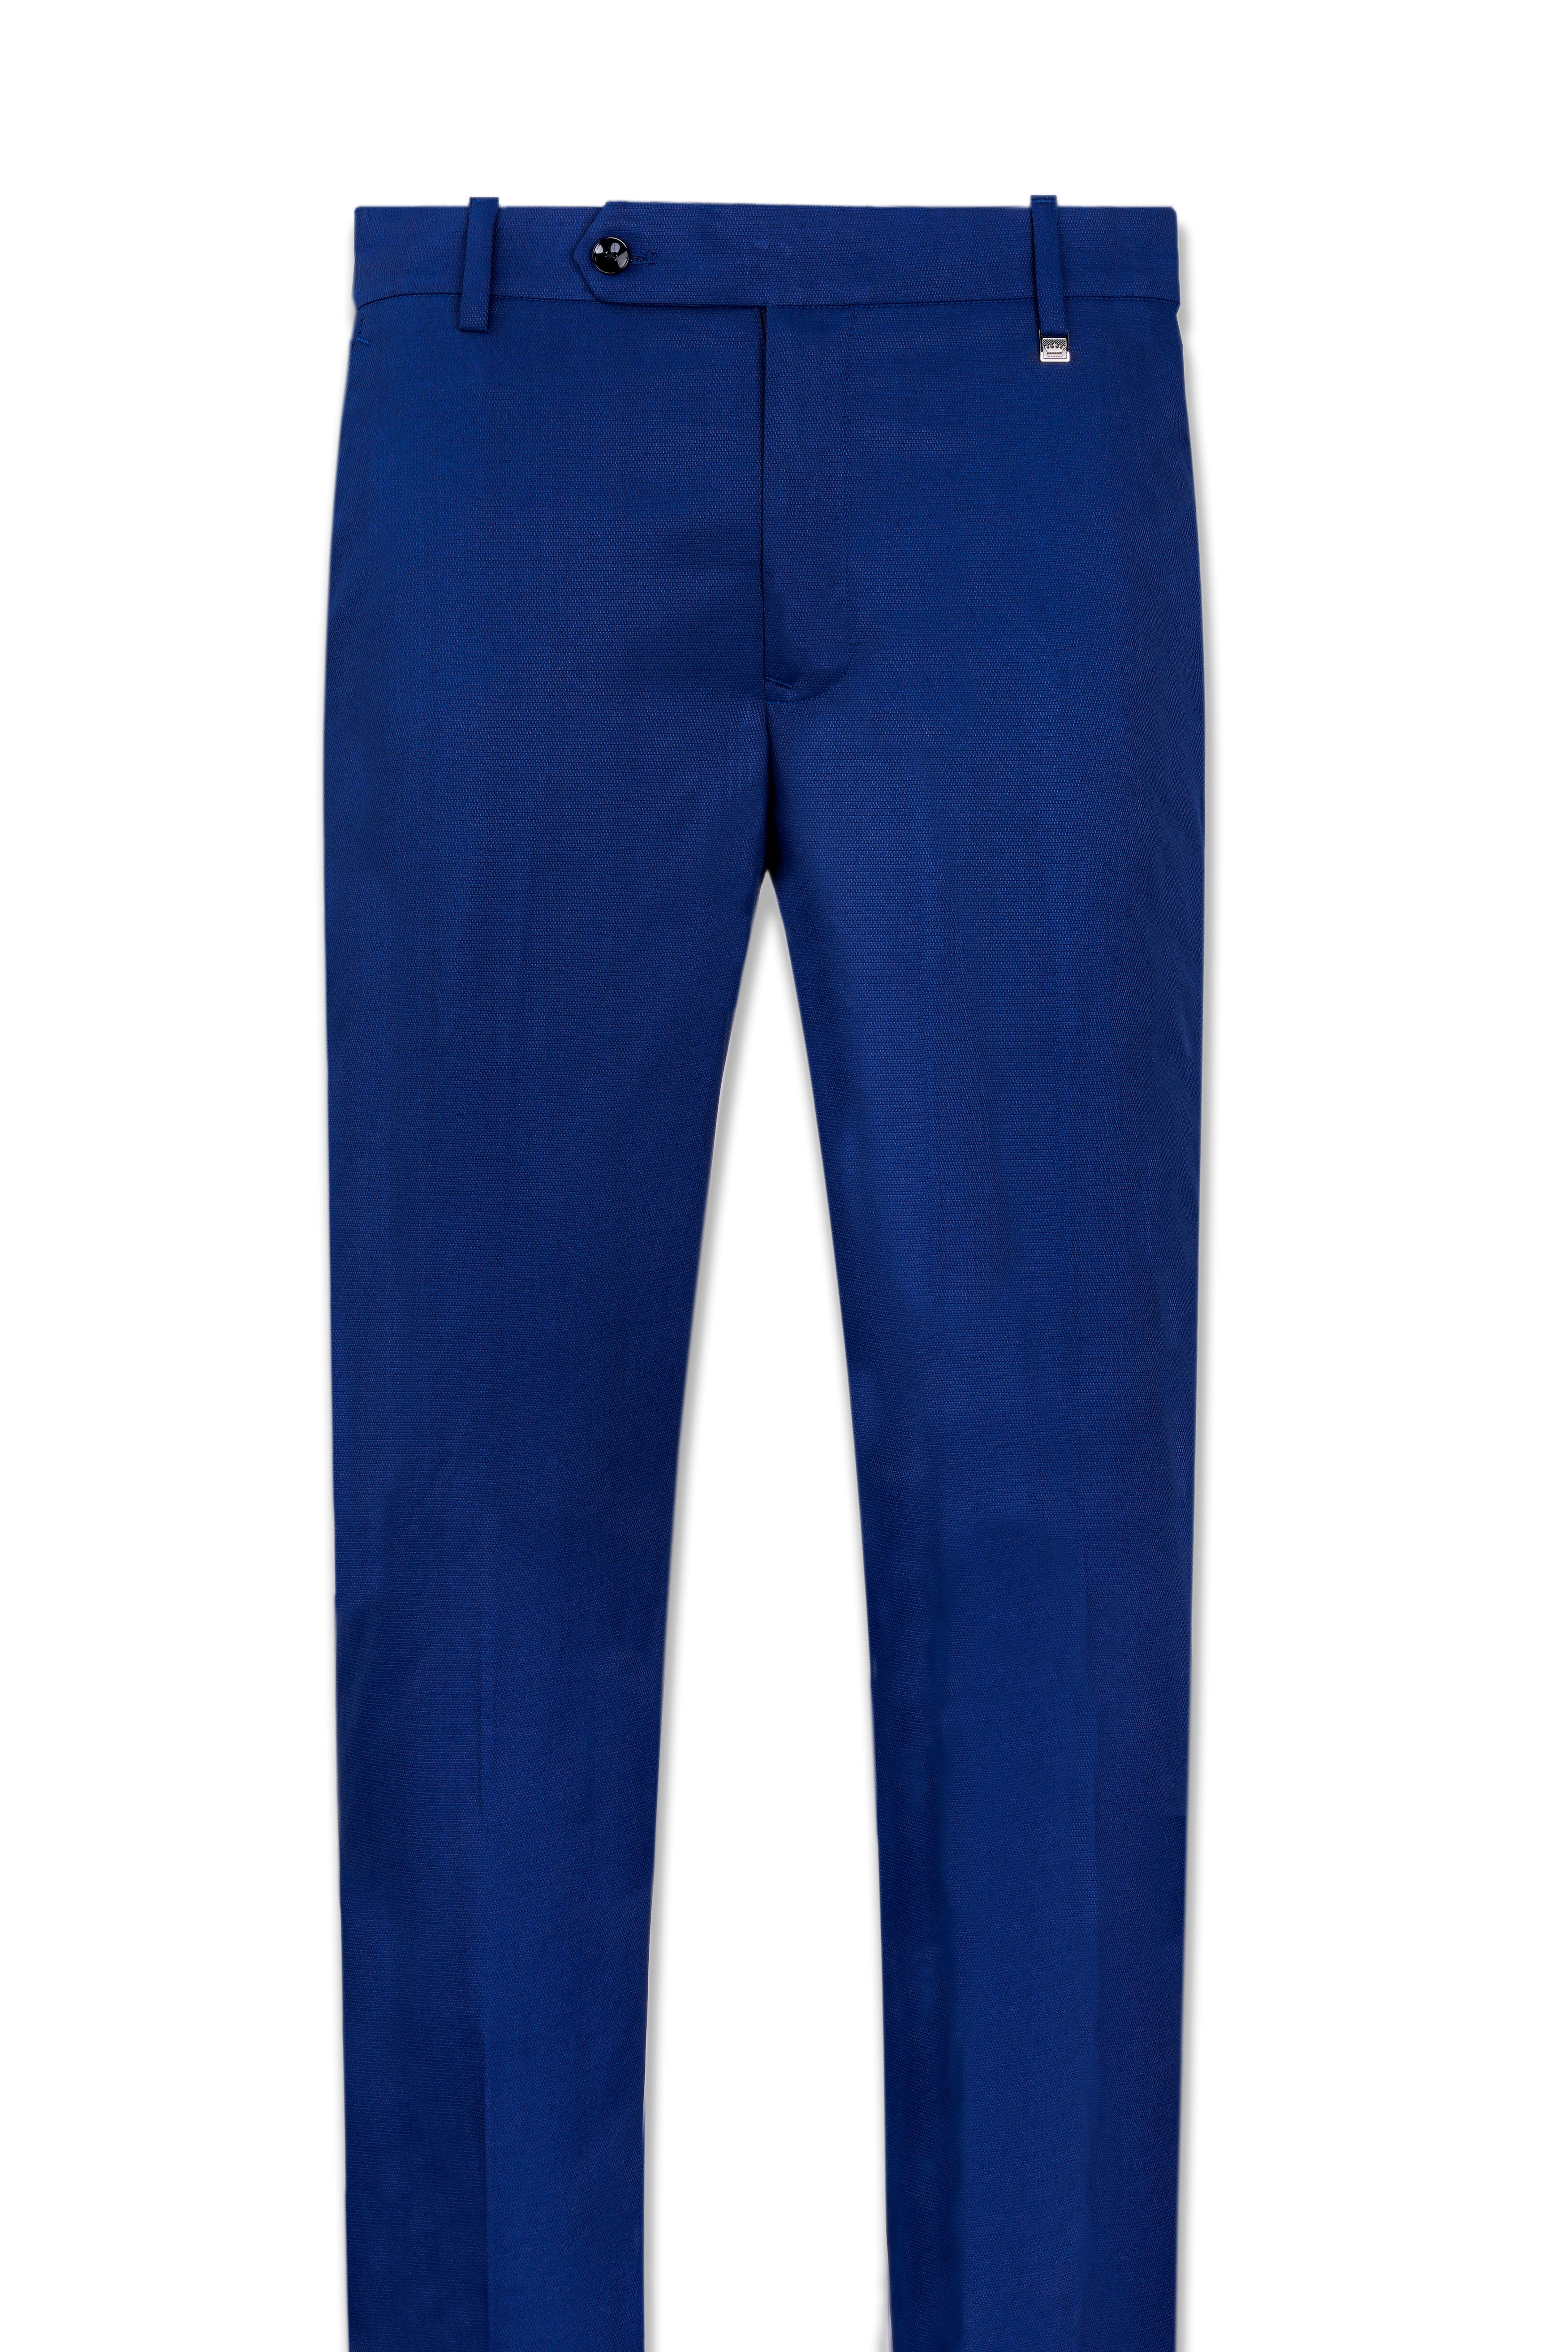 Catalina Blue Wool Rich Stretchable Pant T2943-SW-28, T2943-SW-30, T2943-SW-32, T2943-SW-34, T2943-SW-36, T2943-SW-38, T2943-SW-40, T2943-SW-42, T2943-SW-44